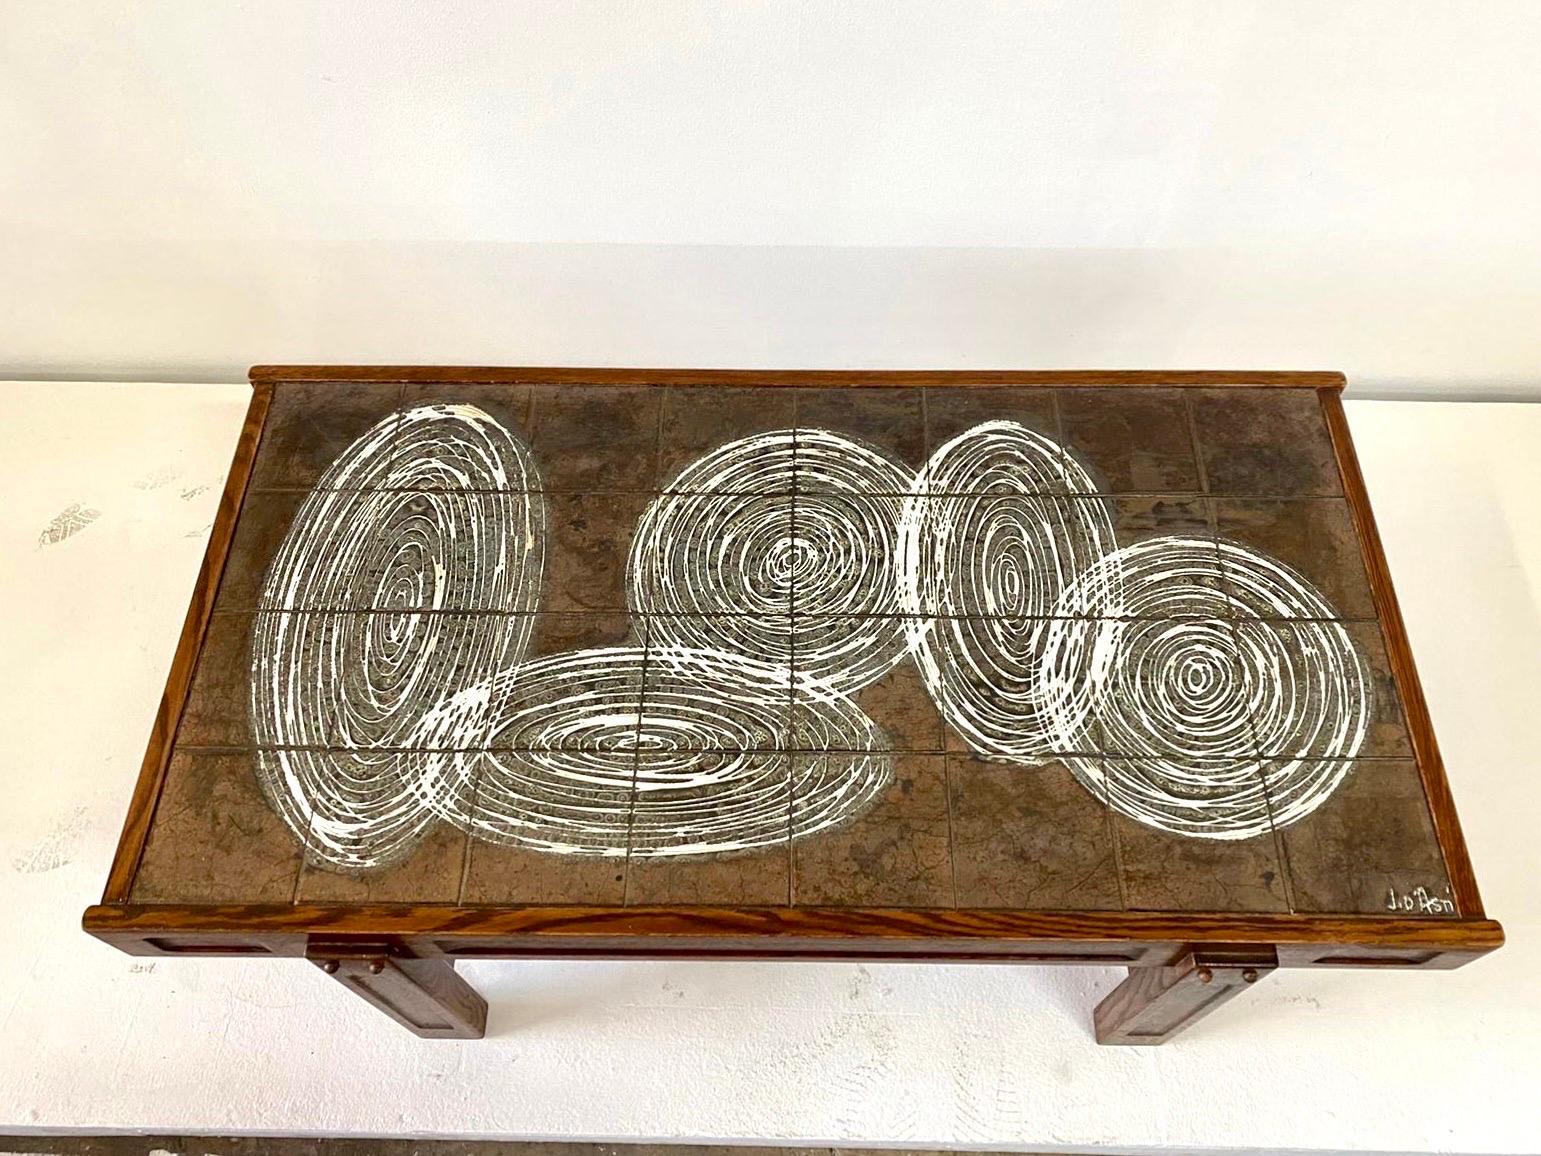 This wonderfully modern yet vintage ceramic top tiled coffee table, made in Vallauris, France circa 1960's. The design and colors are very relevant today, white intertwining circles and ovals to dark iridescent background and natural wood frame.